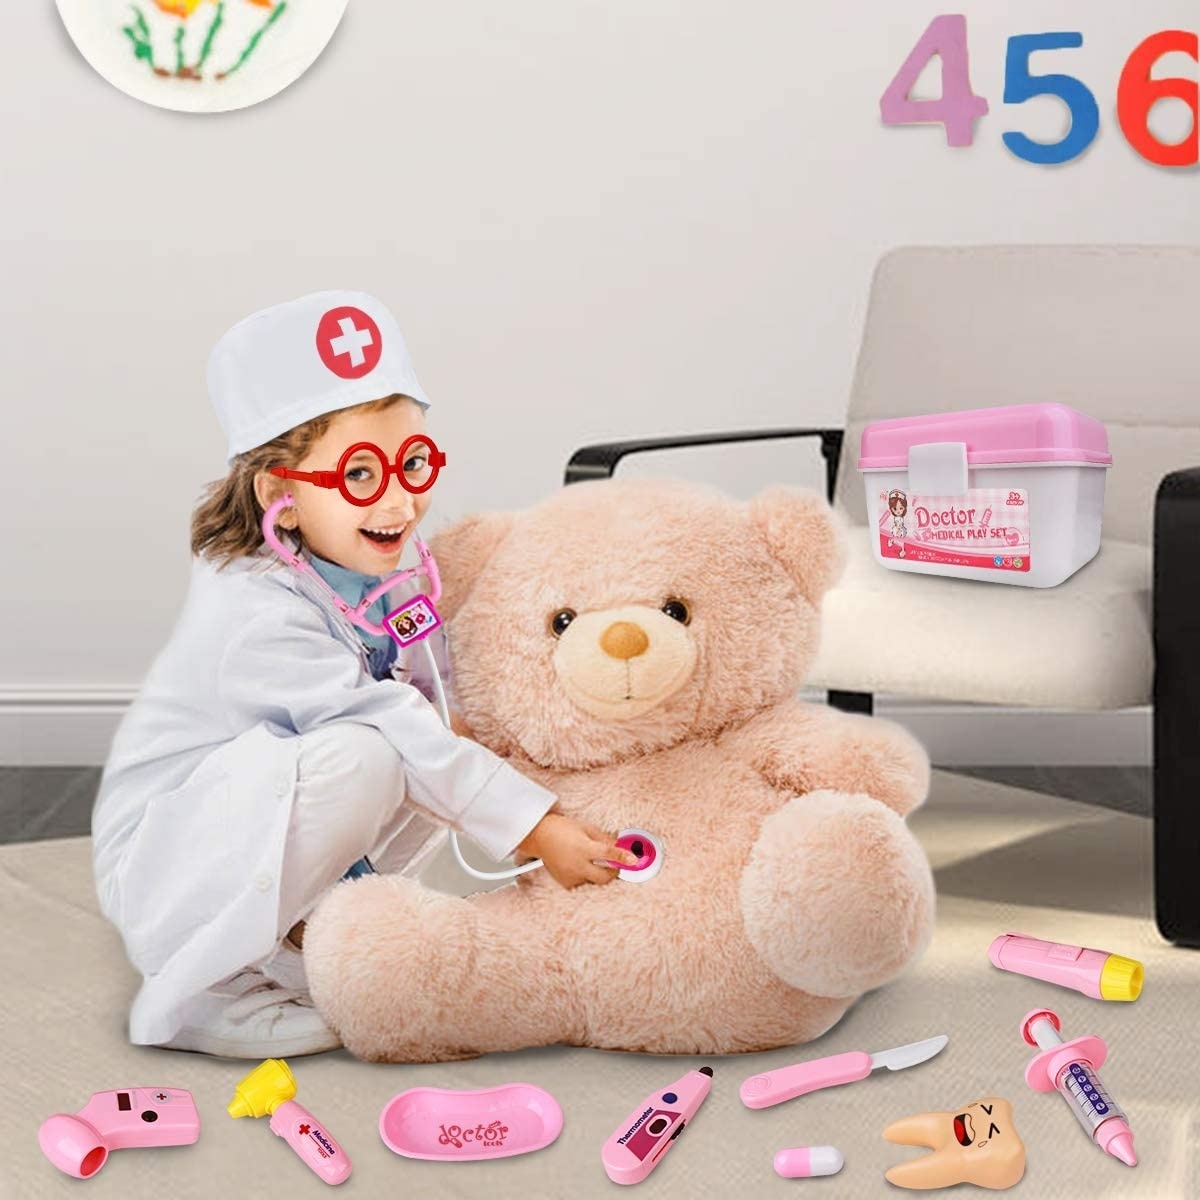 35-Pcs-Simulation-Medical-Role-Play-Pretend-Doctor-Game-Equipment-Set-Educational-Toy-with-Box-for-K-1730581-9